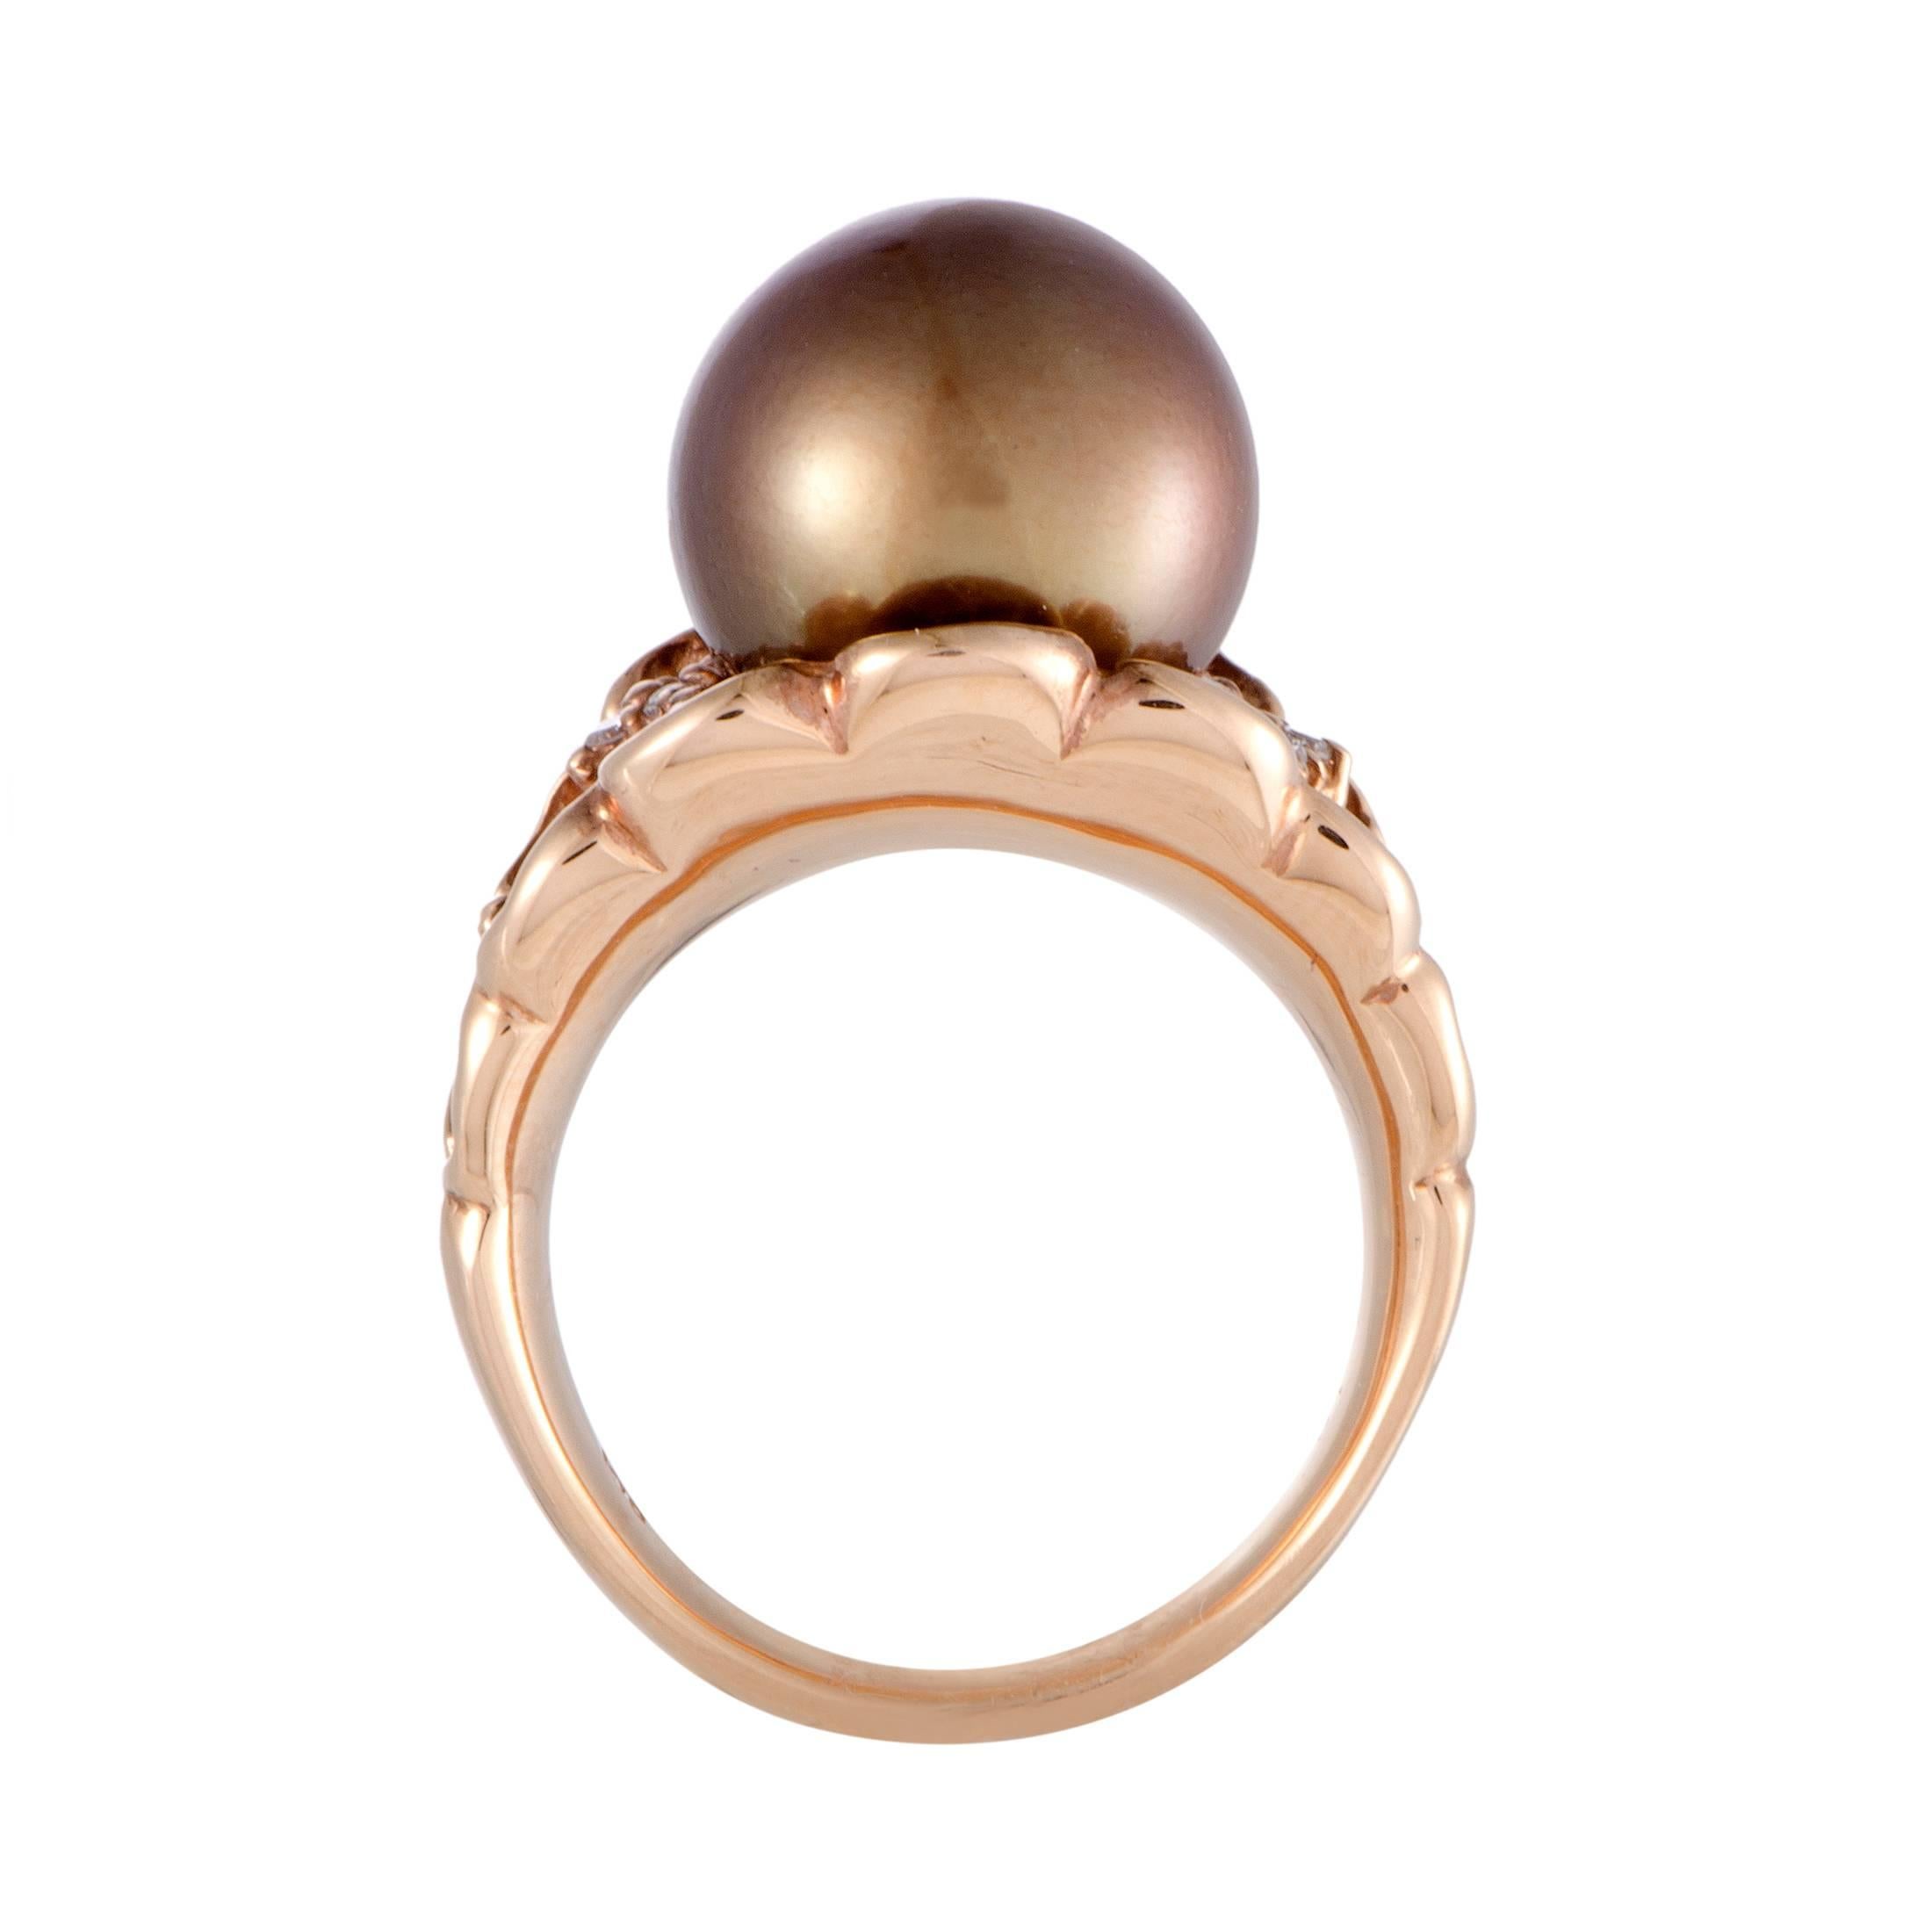 Endearingly feminine, this delightful ring is made of 18K rose gold and decorated with a sublime brown pearl and 0.18 carats of diamonds, offering an exceptionally elegant, stylish appearance.
Ring Size: 6.25
Ring Top Dimensions: 22mm x 17mm
Band